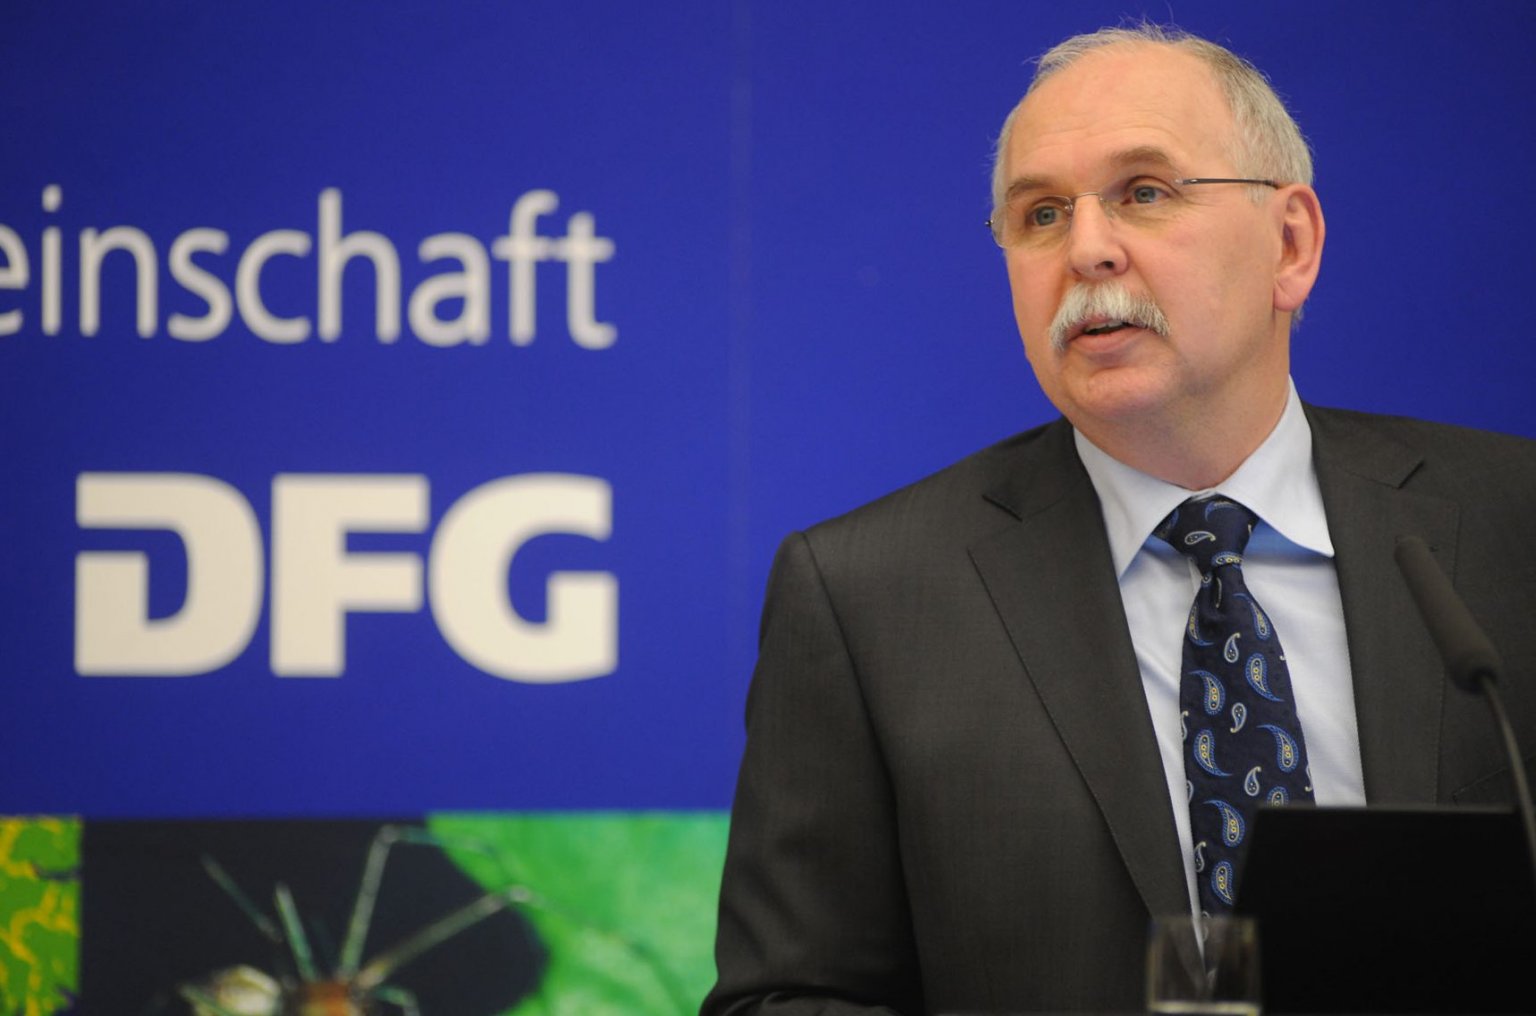 DFG chief announces global sustainability initiatives with ICSU